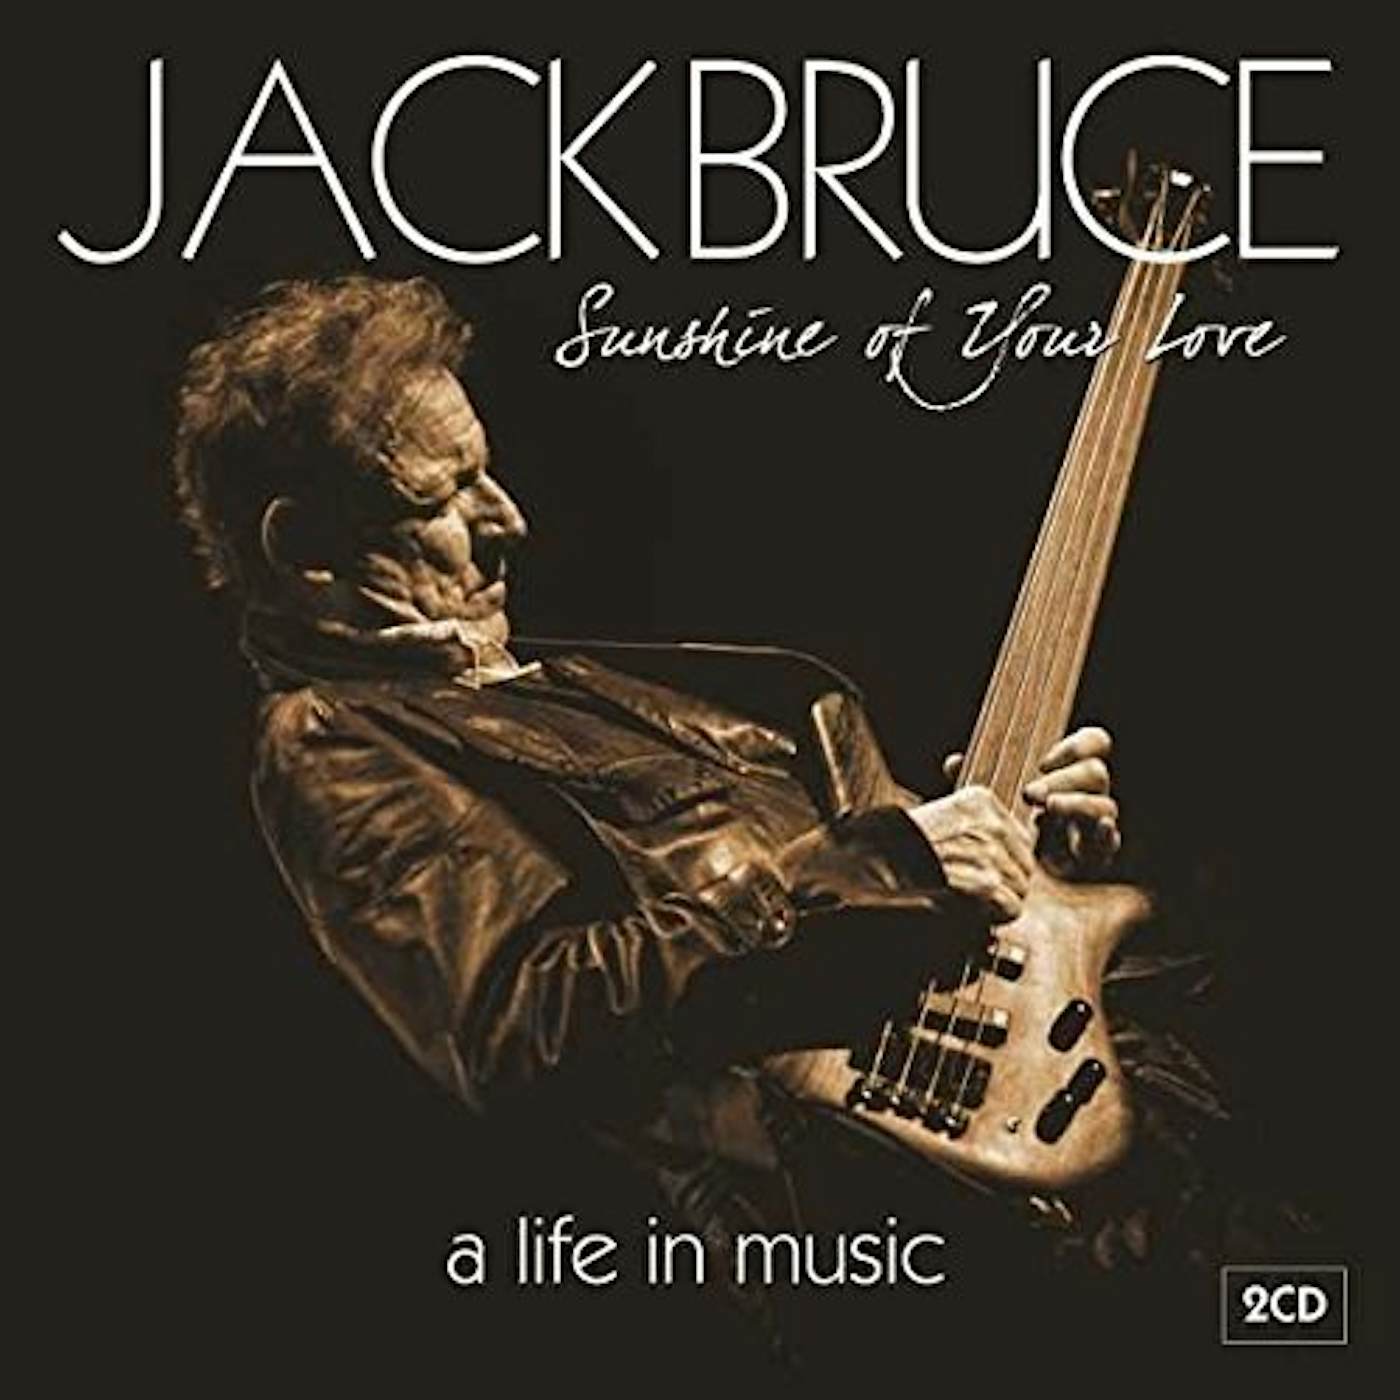 Jack Bruce SUNSHINE OF YOUR LOVE: A LIFE IN MUSIC CD